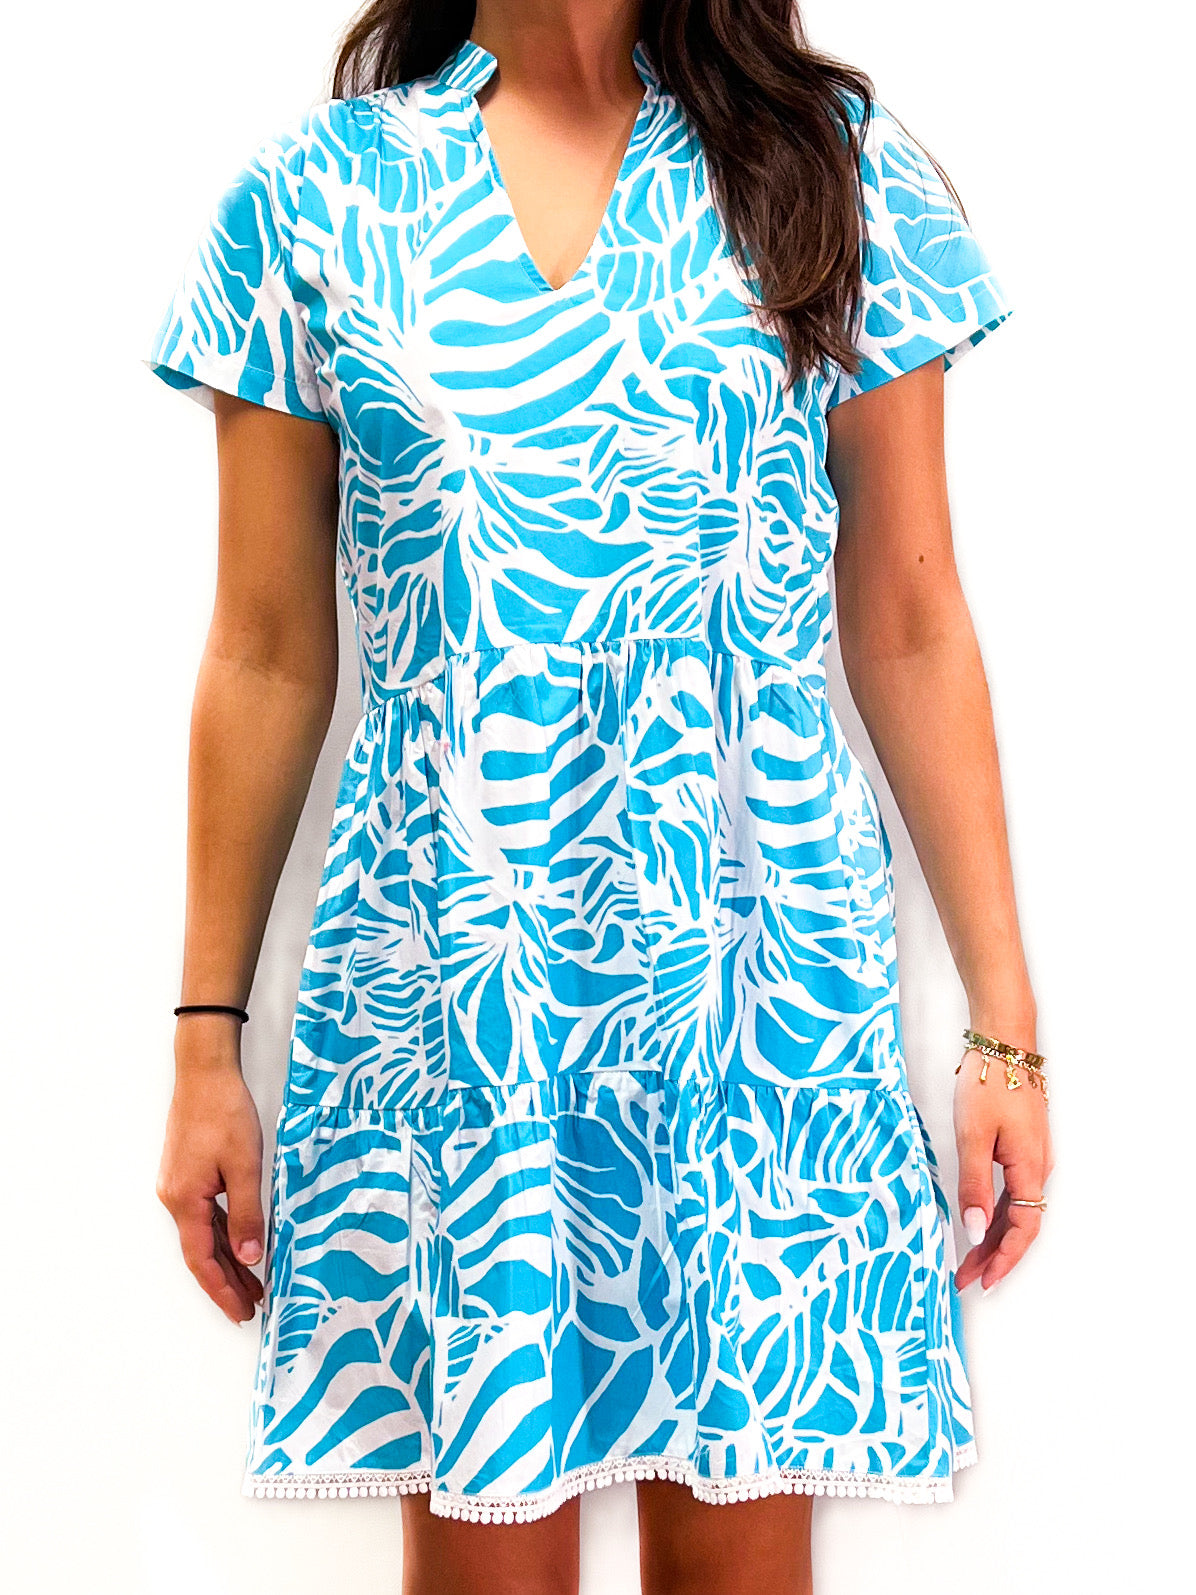 Alison Shortsleeve Dress - Abstract Floral - White/Capri Turquoise